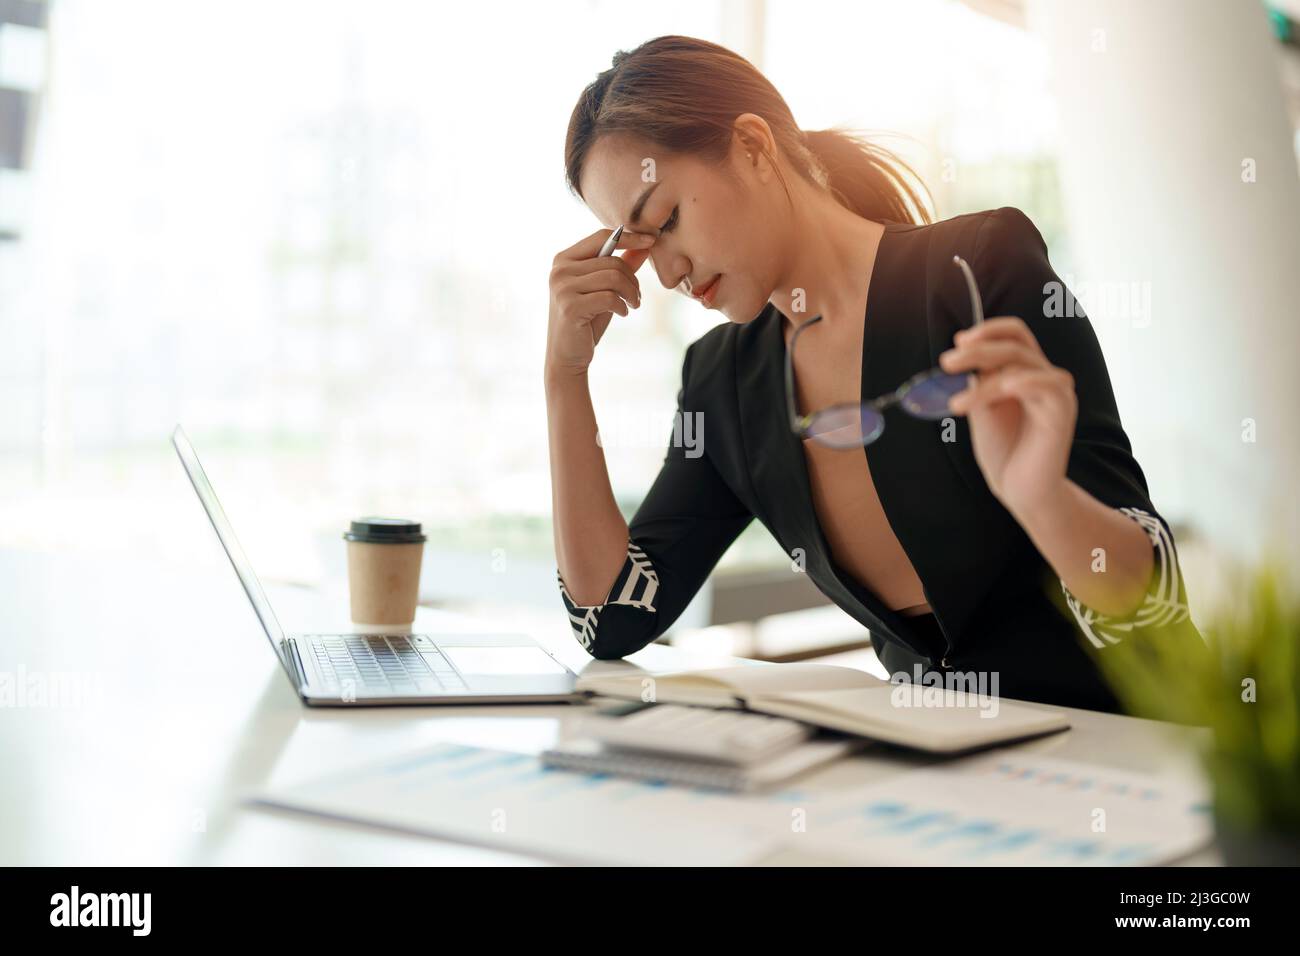 Very stressed business asian woman sitting in front of her computer looking at a large pile of paperwork, while holding a hand at her forehead Stock Photo